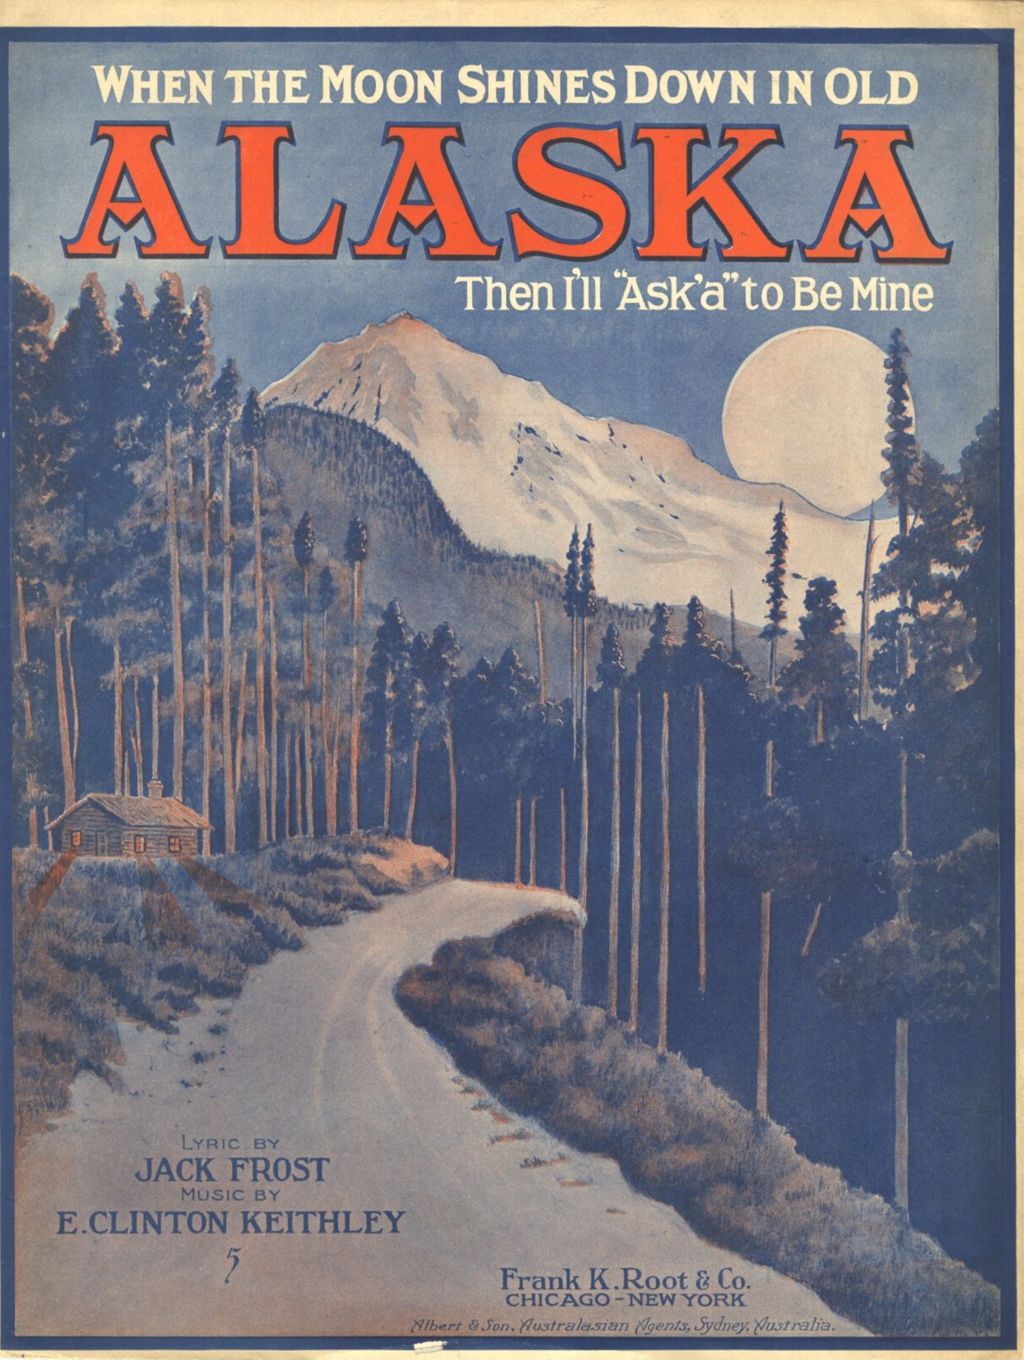 When the Moon Shines Down in Old Alaska (Then I'll "Ask'" to be Mine)